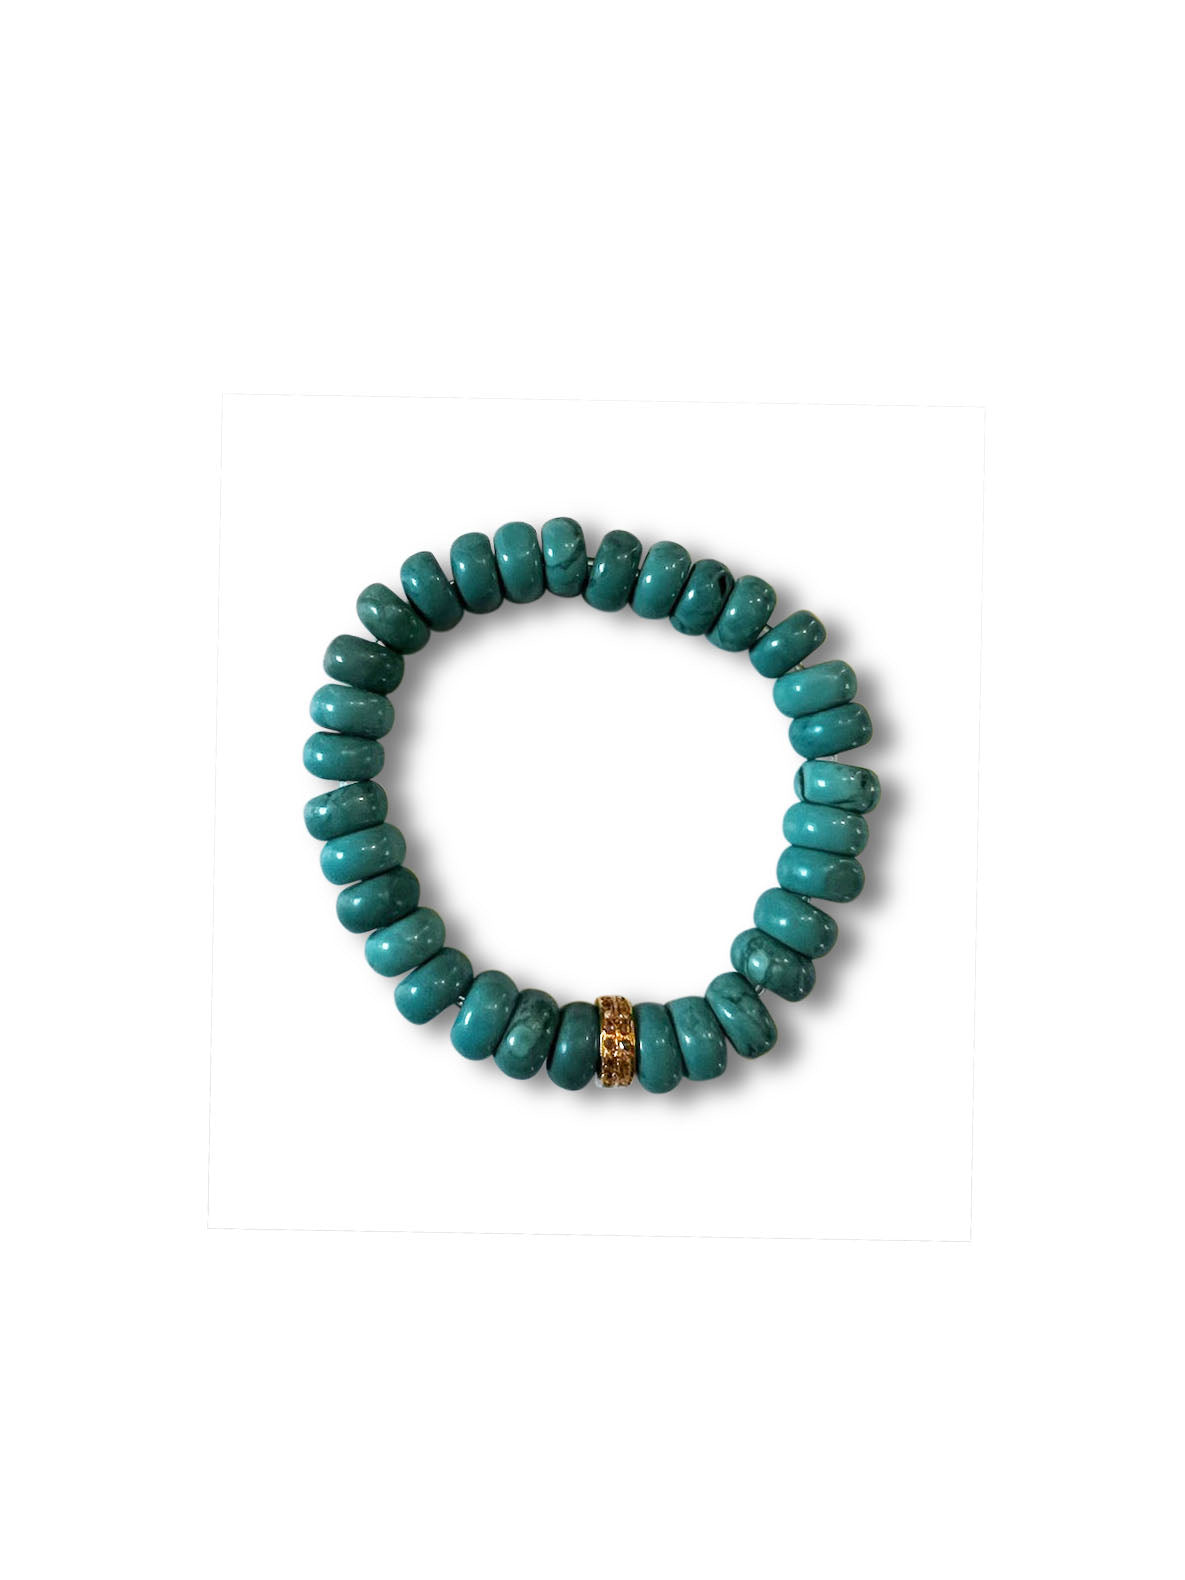 Turquoise with Pave Diamond Rondelle